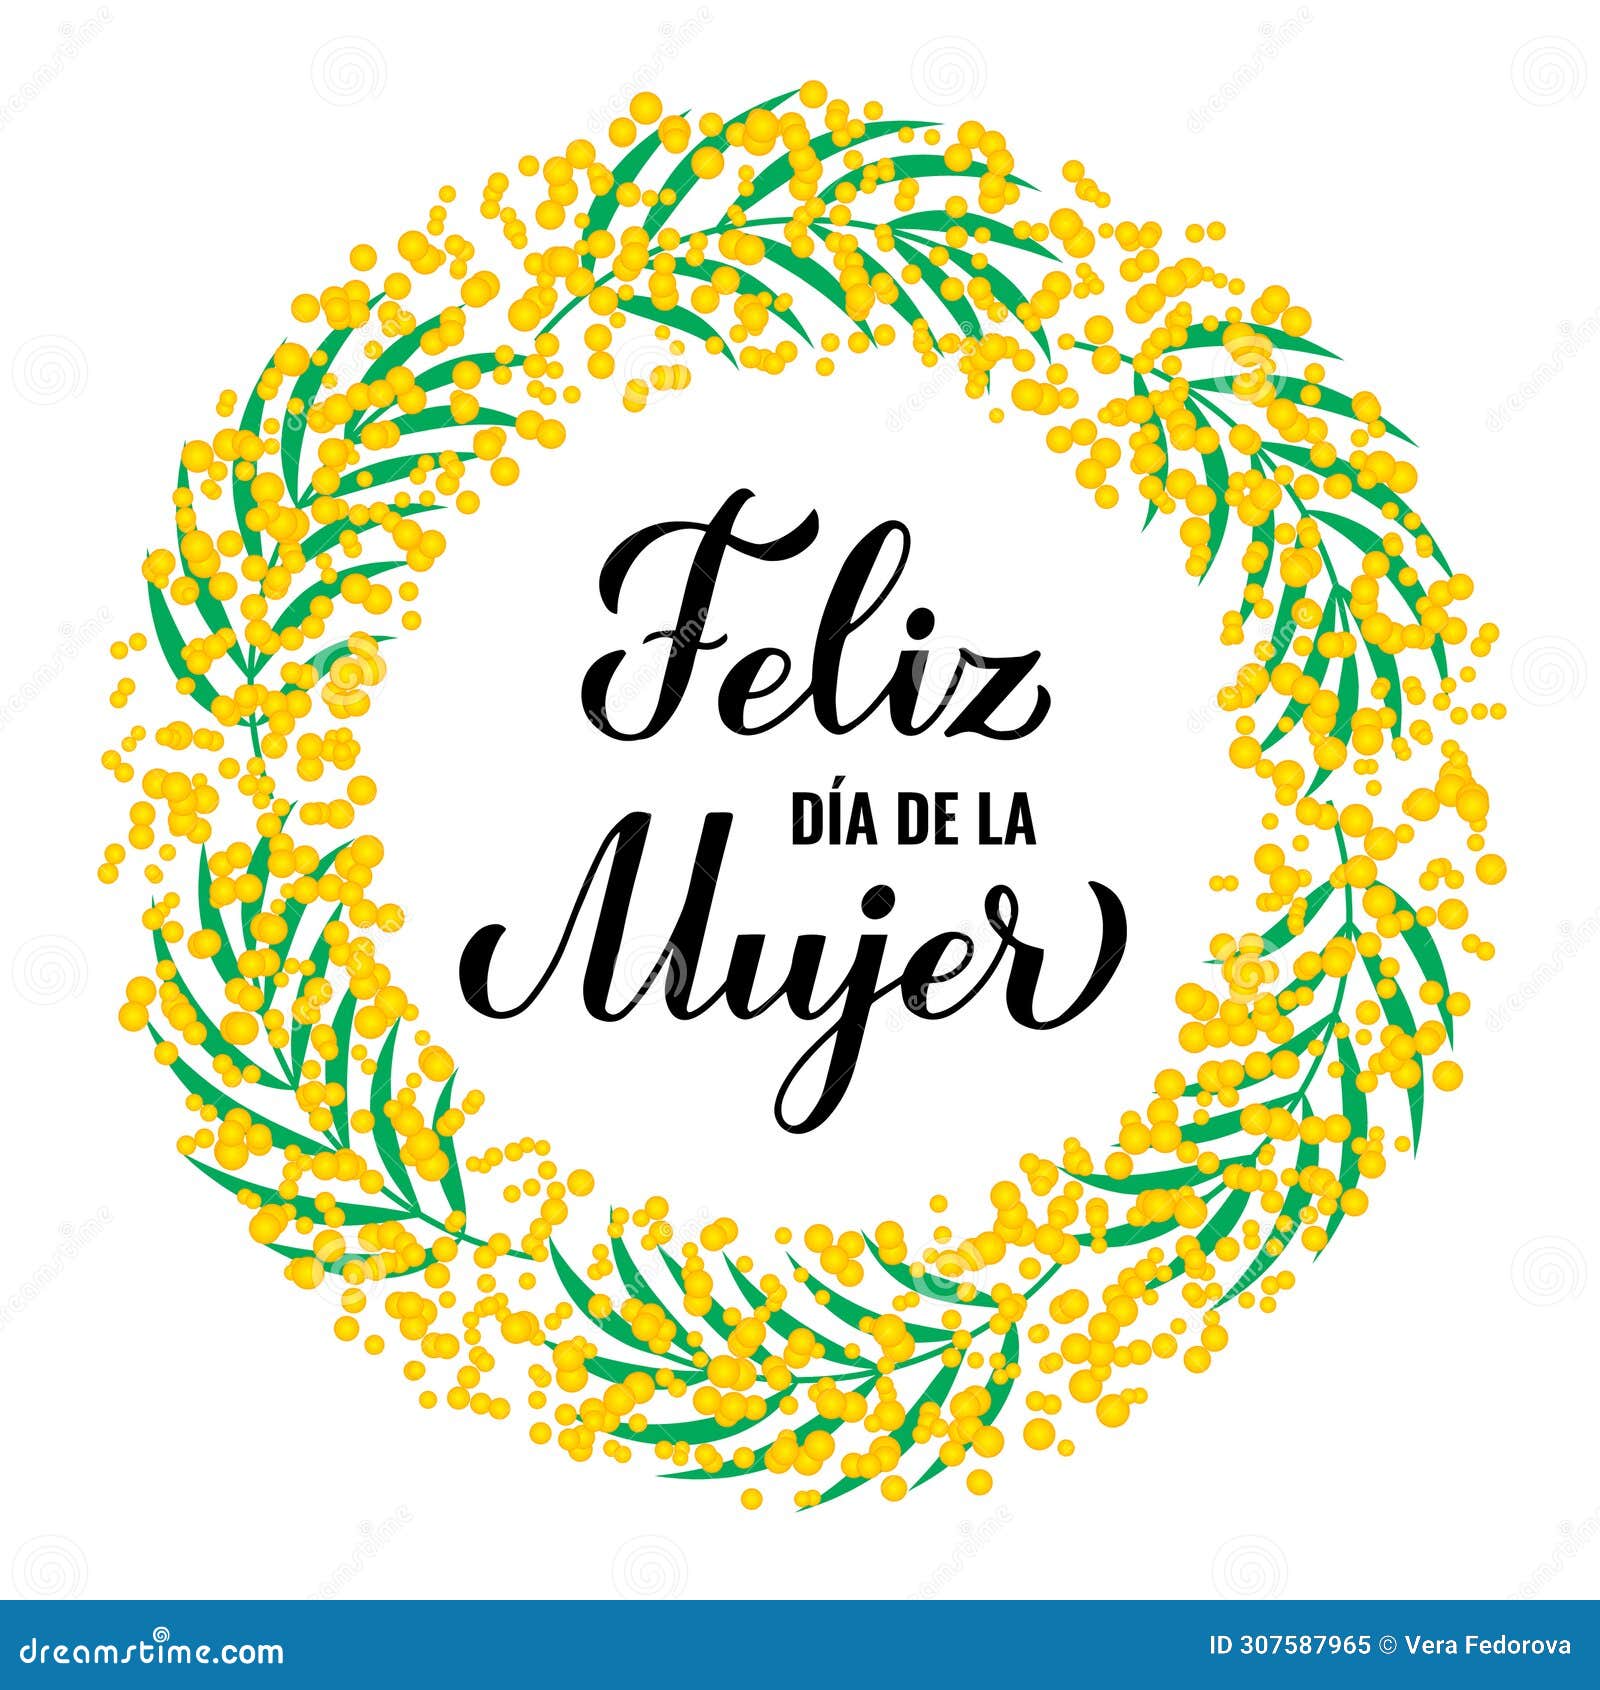 feliz dia de la mujer - happy womens day in spanish. calligraphy lettering with floral mimosa wreath. international